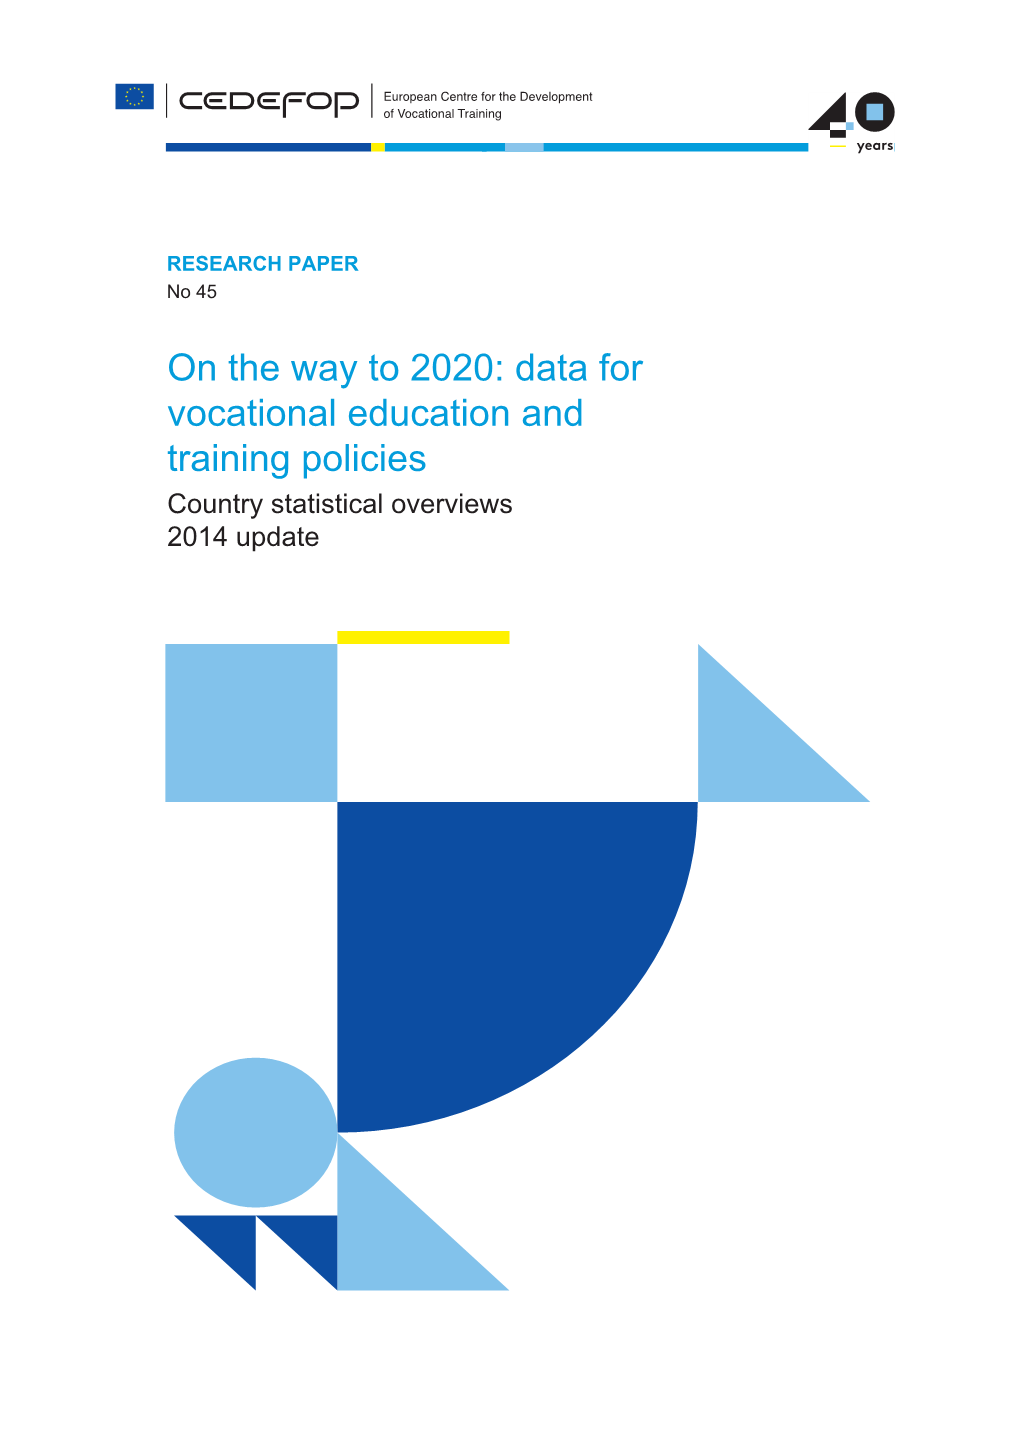 On the Way to 2020: Data for Vocational Education and Training Policies Country Statistical Overviews 2014 Update